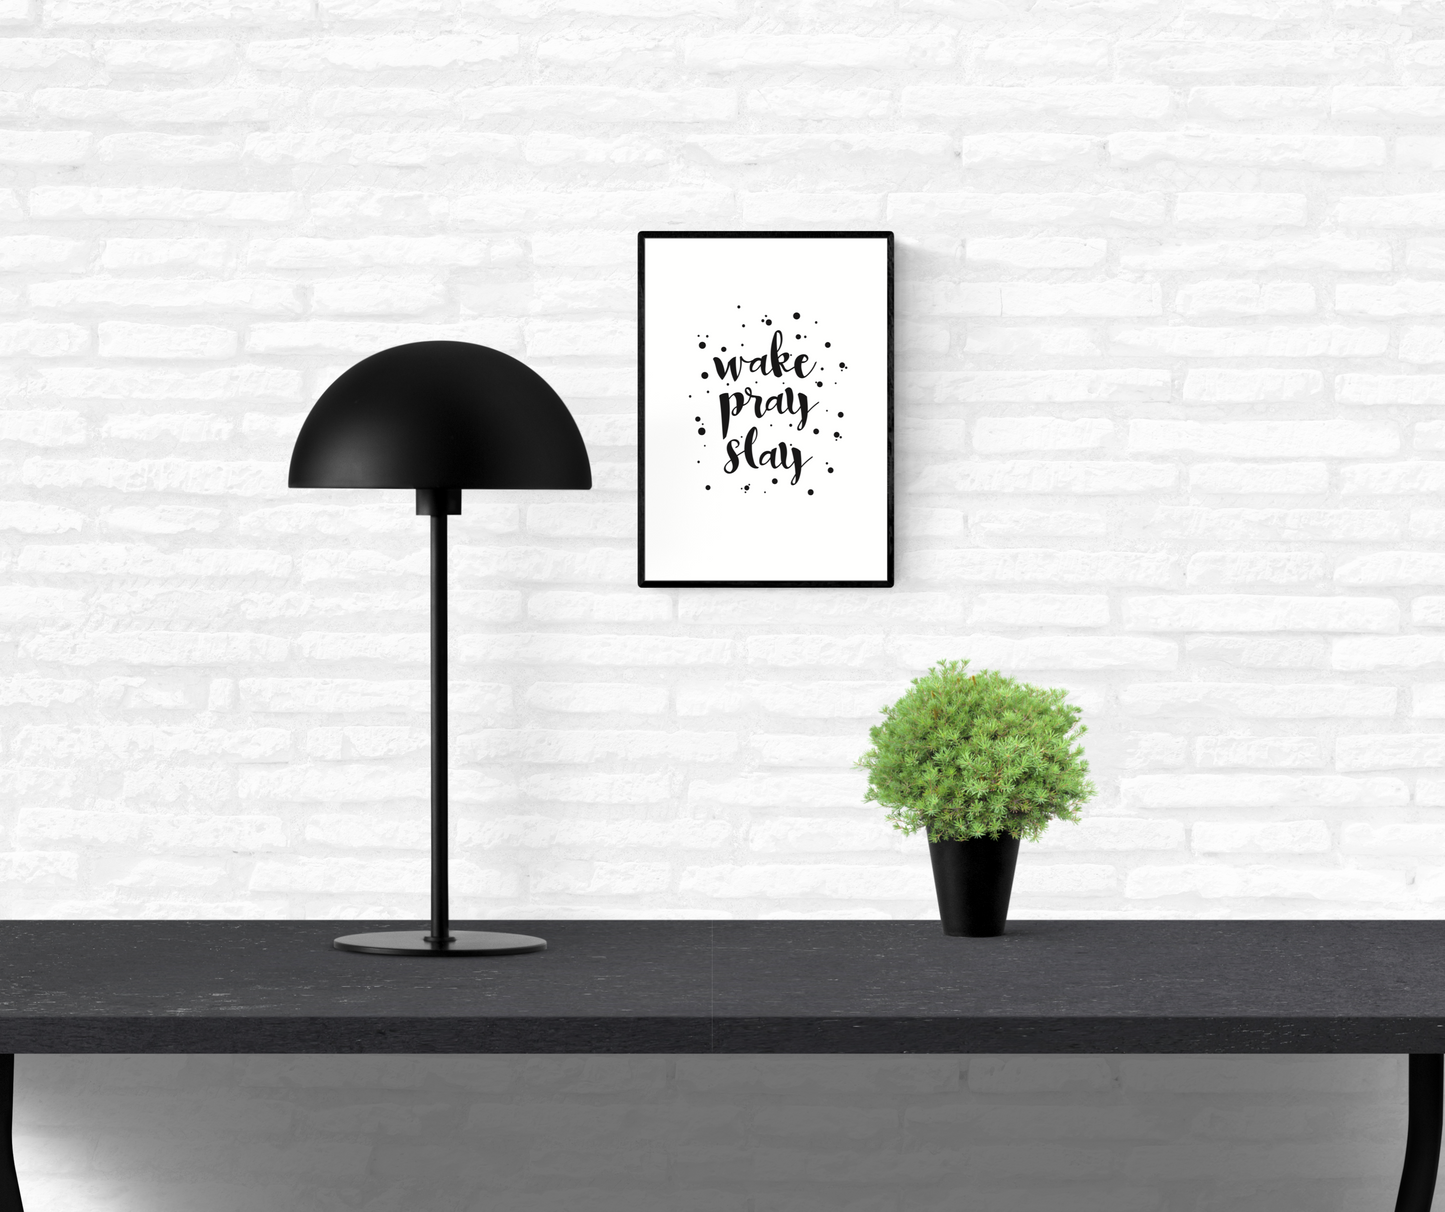 Quote wall print with the words, “wake pray slay”, surrounded by black dots, framed and mounted on an interior white brick home wall above a table